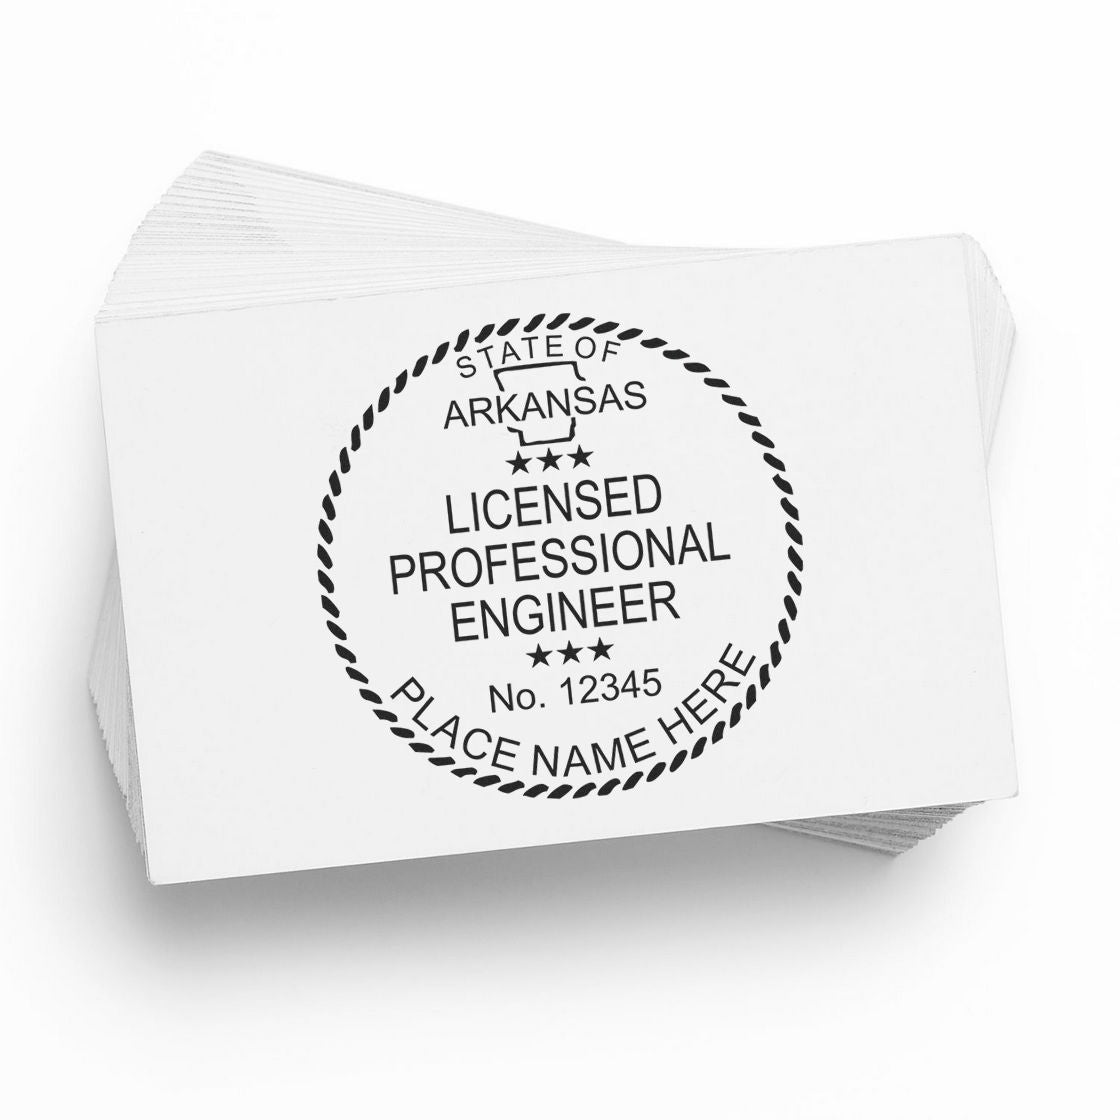 A lifestyle photo showing a stamped image of the Slim Pre-Inked Arkansas Professional Engineer Seal Stamp on a piece of paper